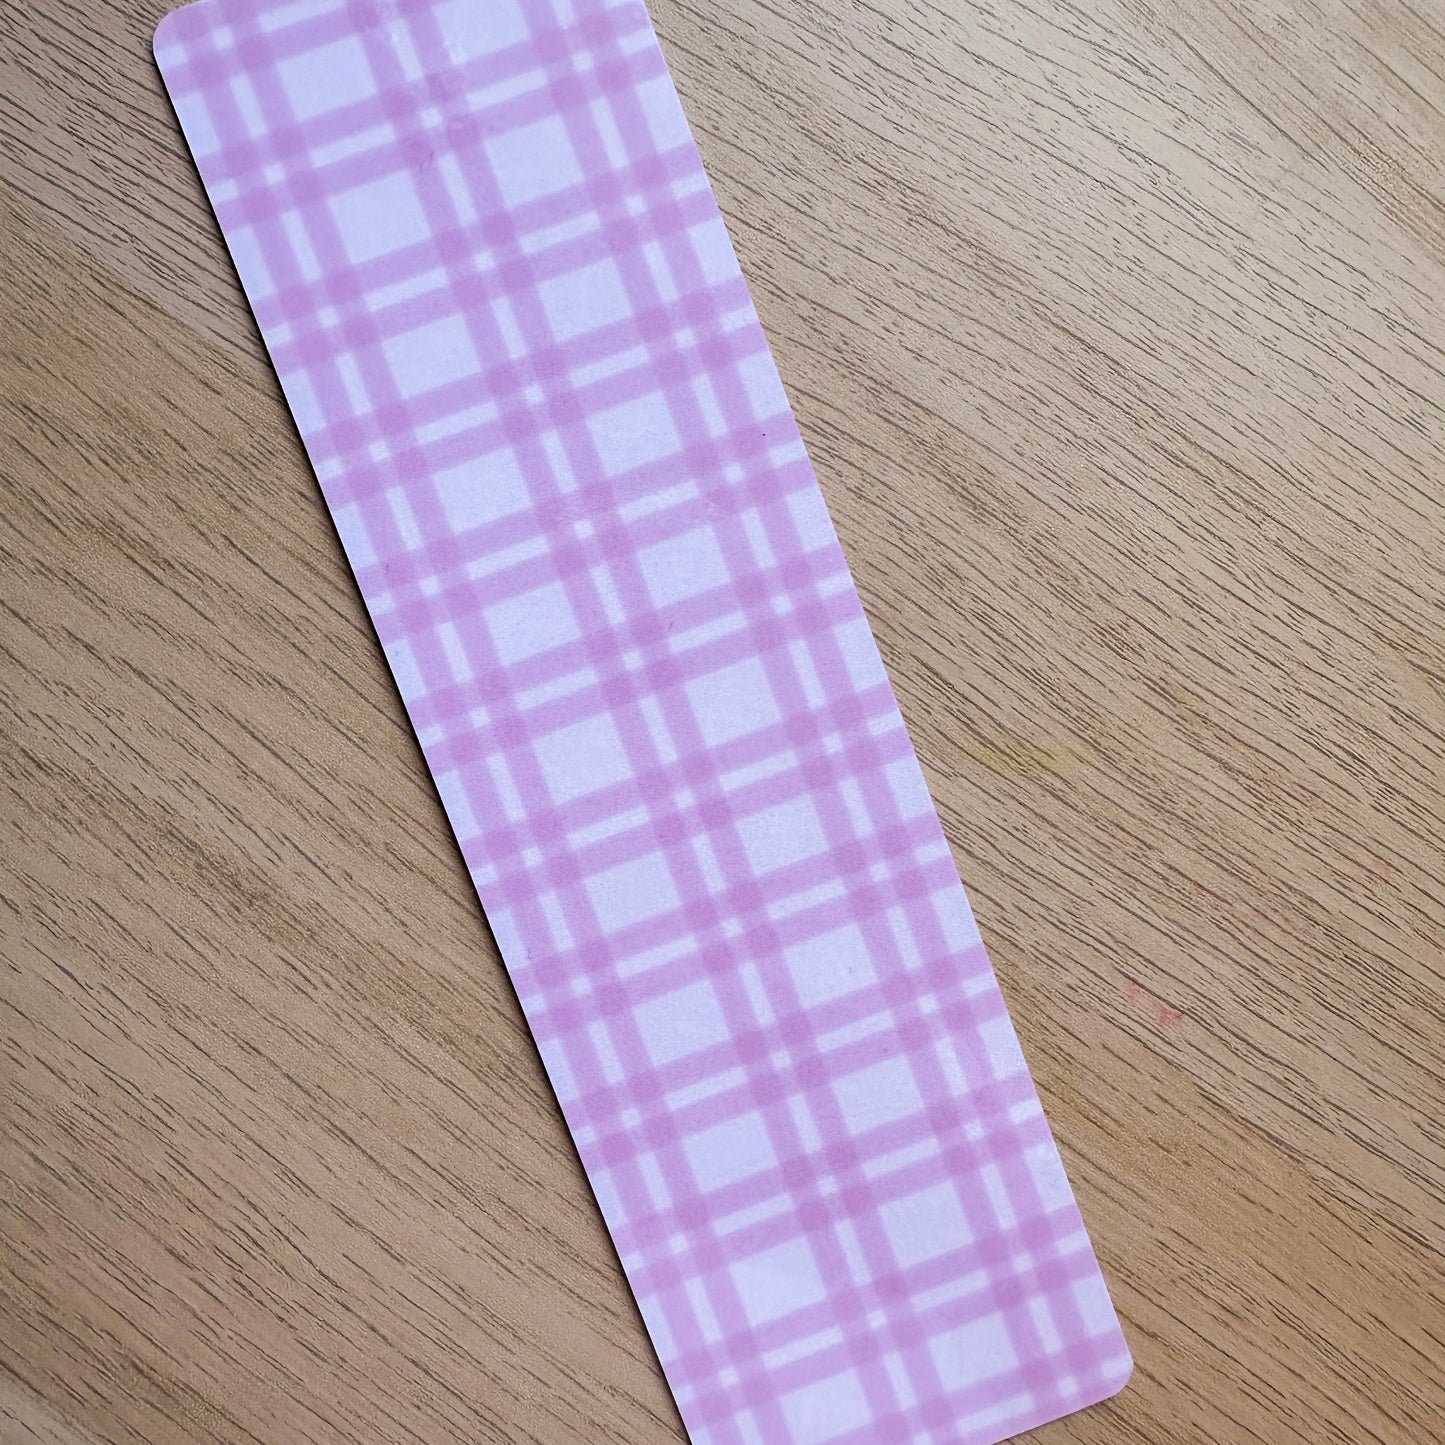 PINK GRID BOOKMARK - GIRLS COLLECTION